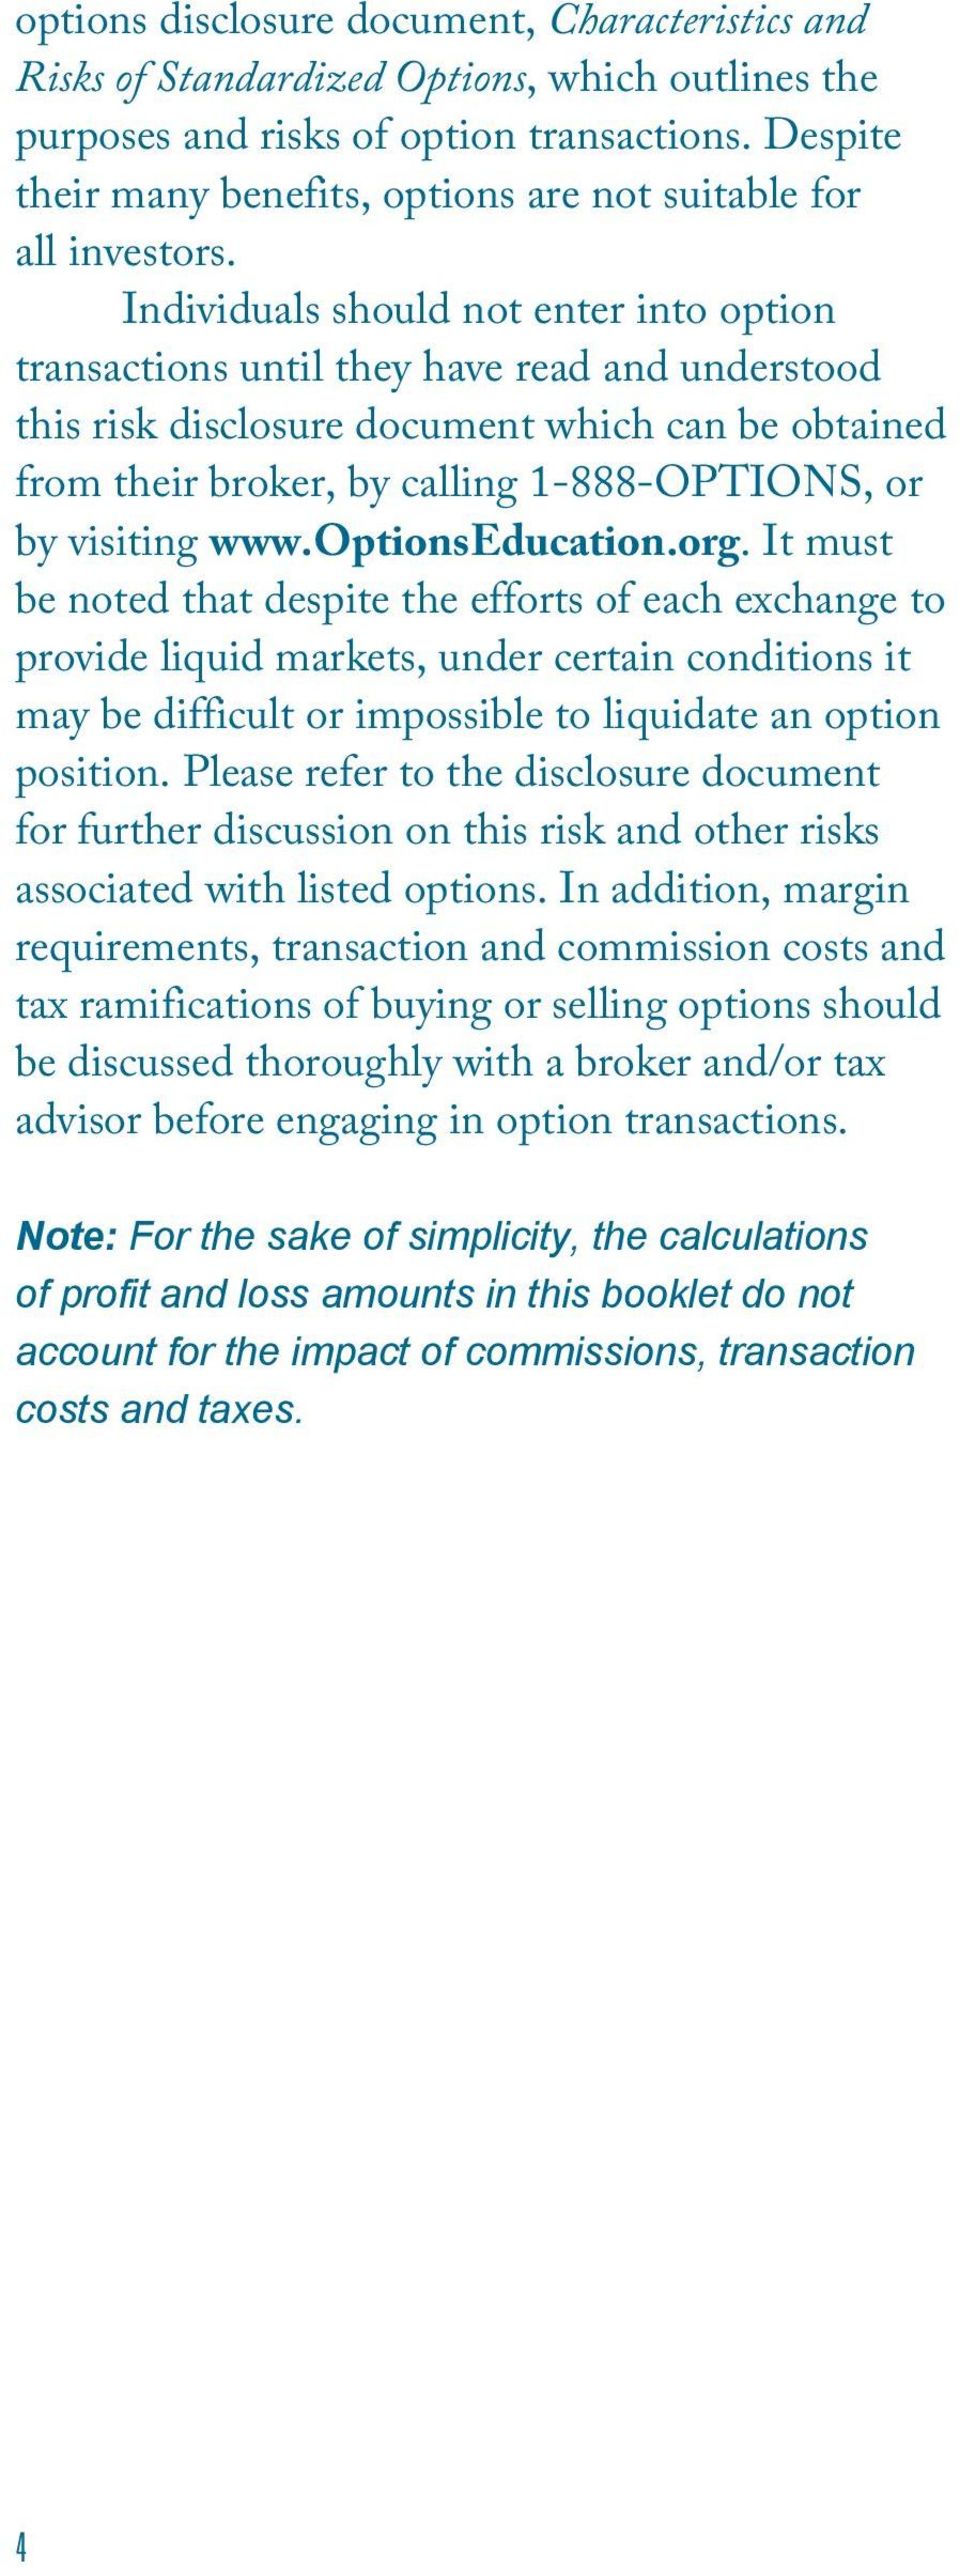 Individuals should not enter into option transactions until they have read and understood this risk disclosure document which can be obtained from their broker, by calling 1-888-OPTIONS, or by